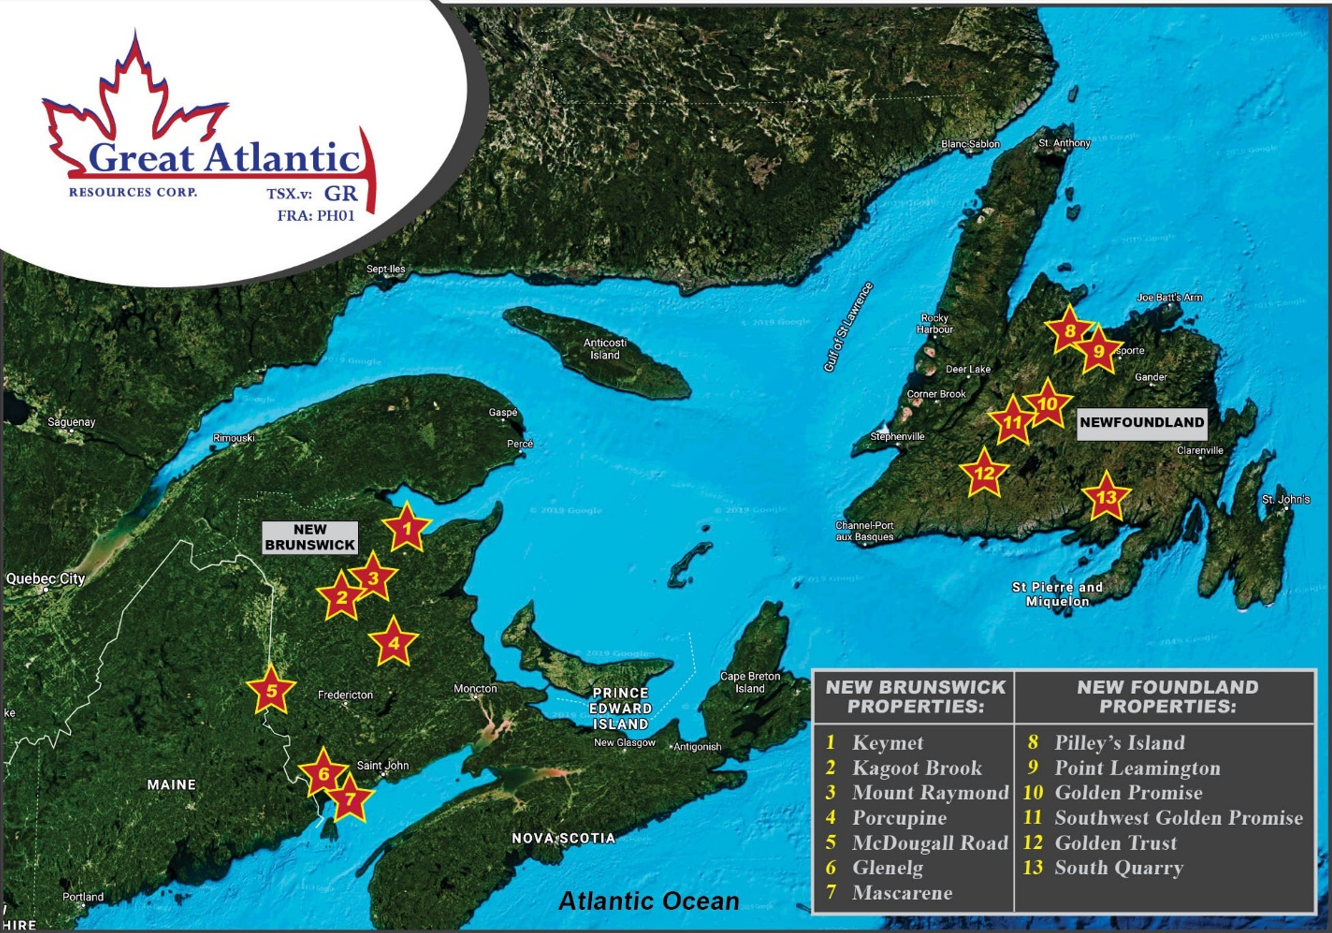 Great Atlantic Resources Corp., Monday, January 13, 2020, Press release picture